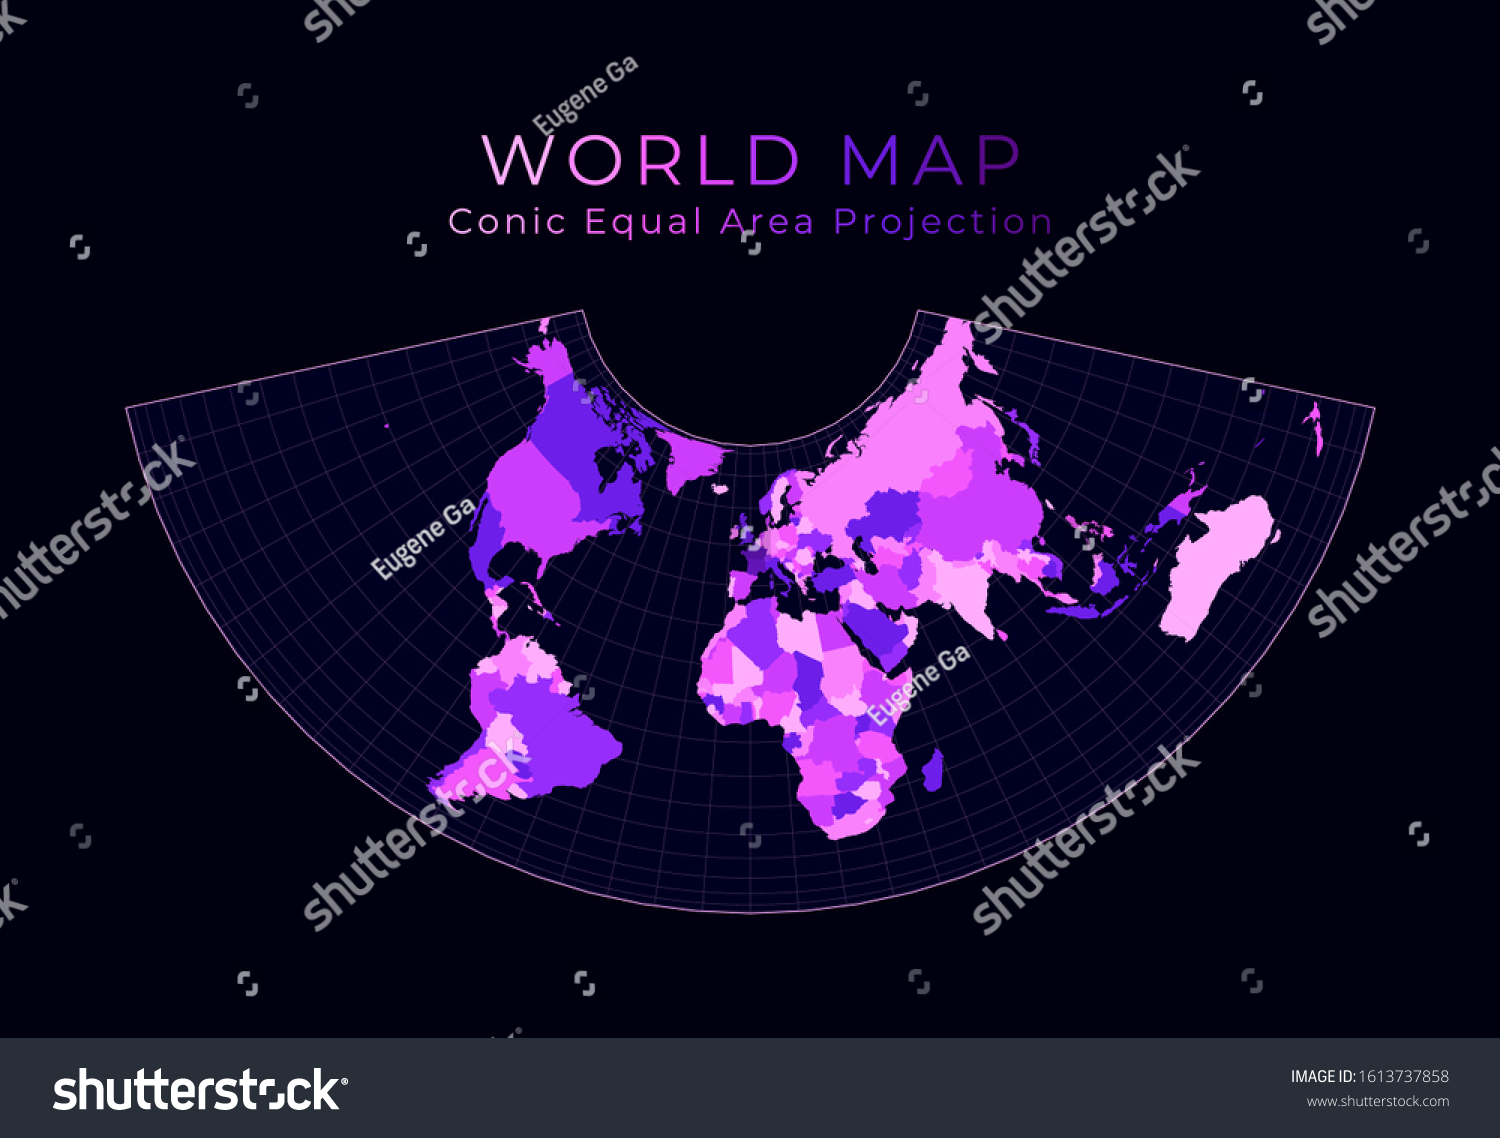 World Map Albers Conic Equal Area Projection Royalty Free Stock Vector 1613737858 2632